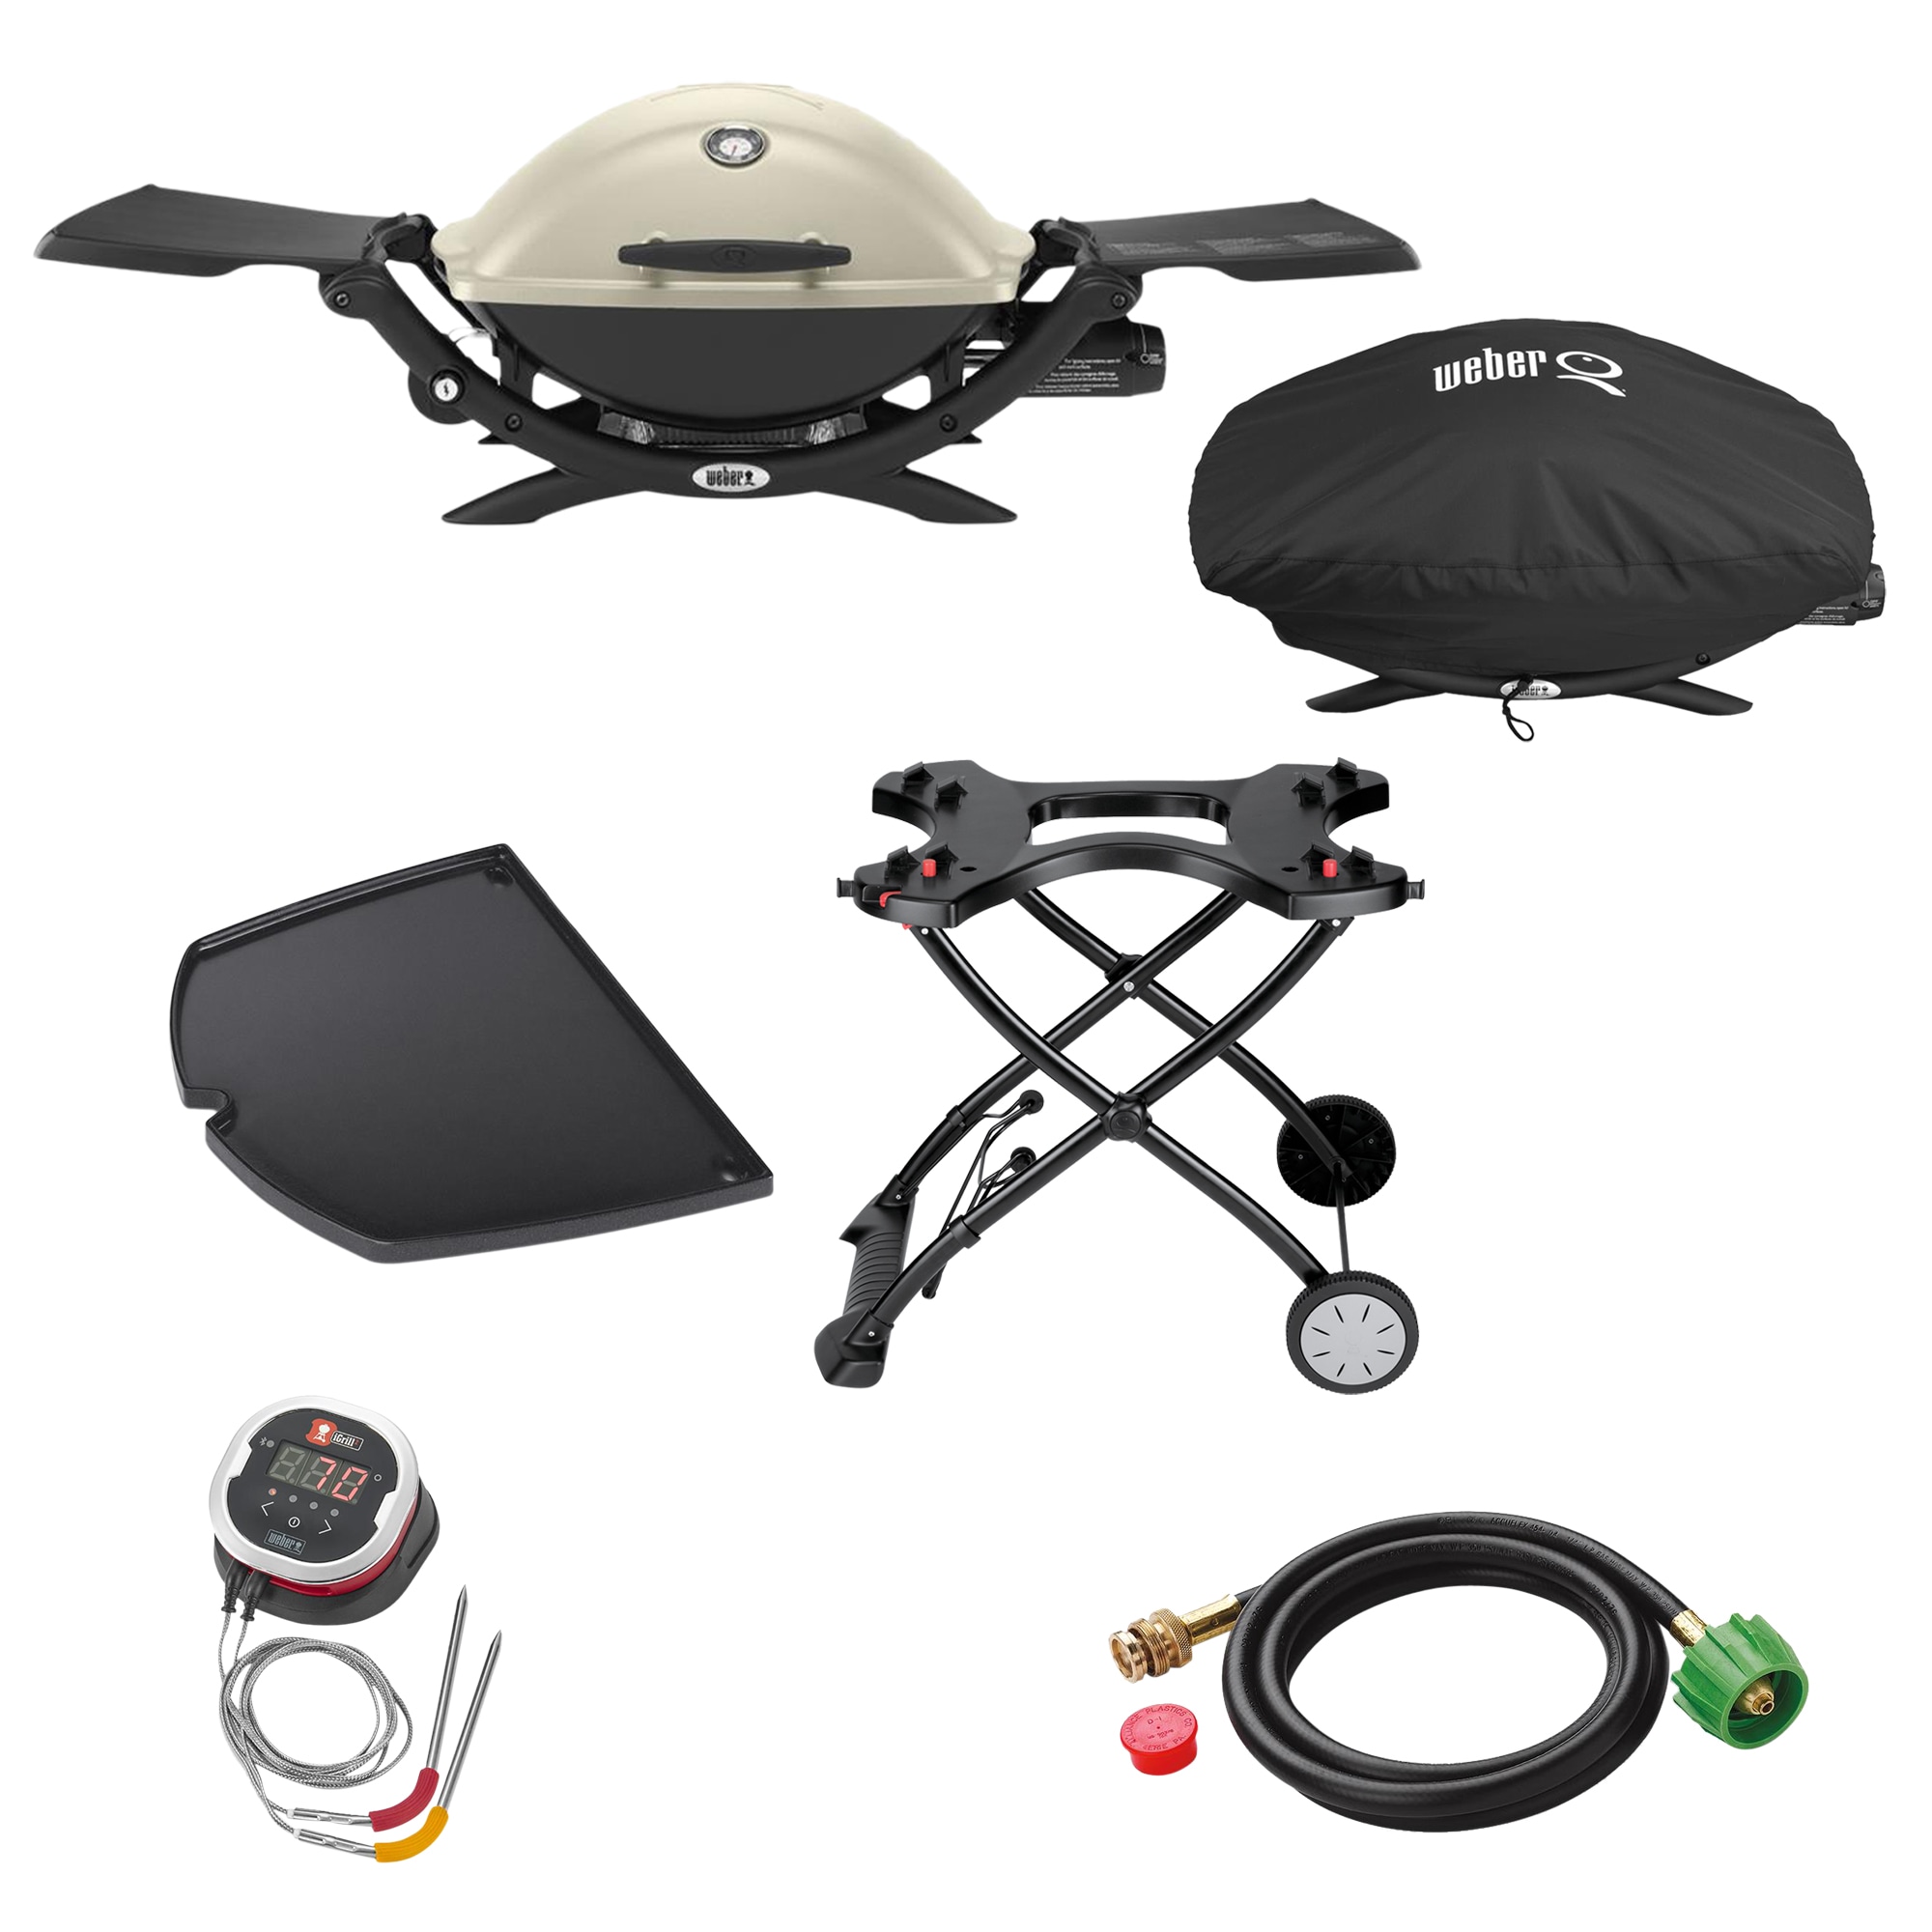 Weber Q 2200 Grill at Lowes.com